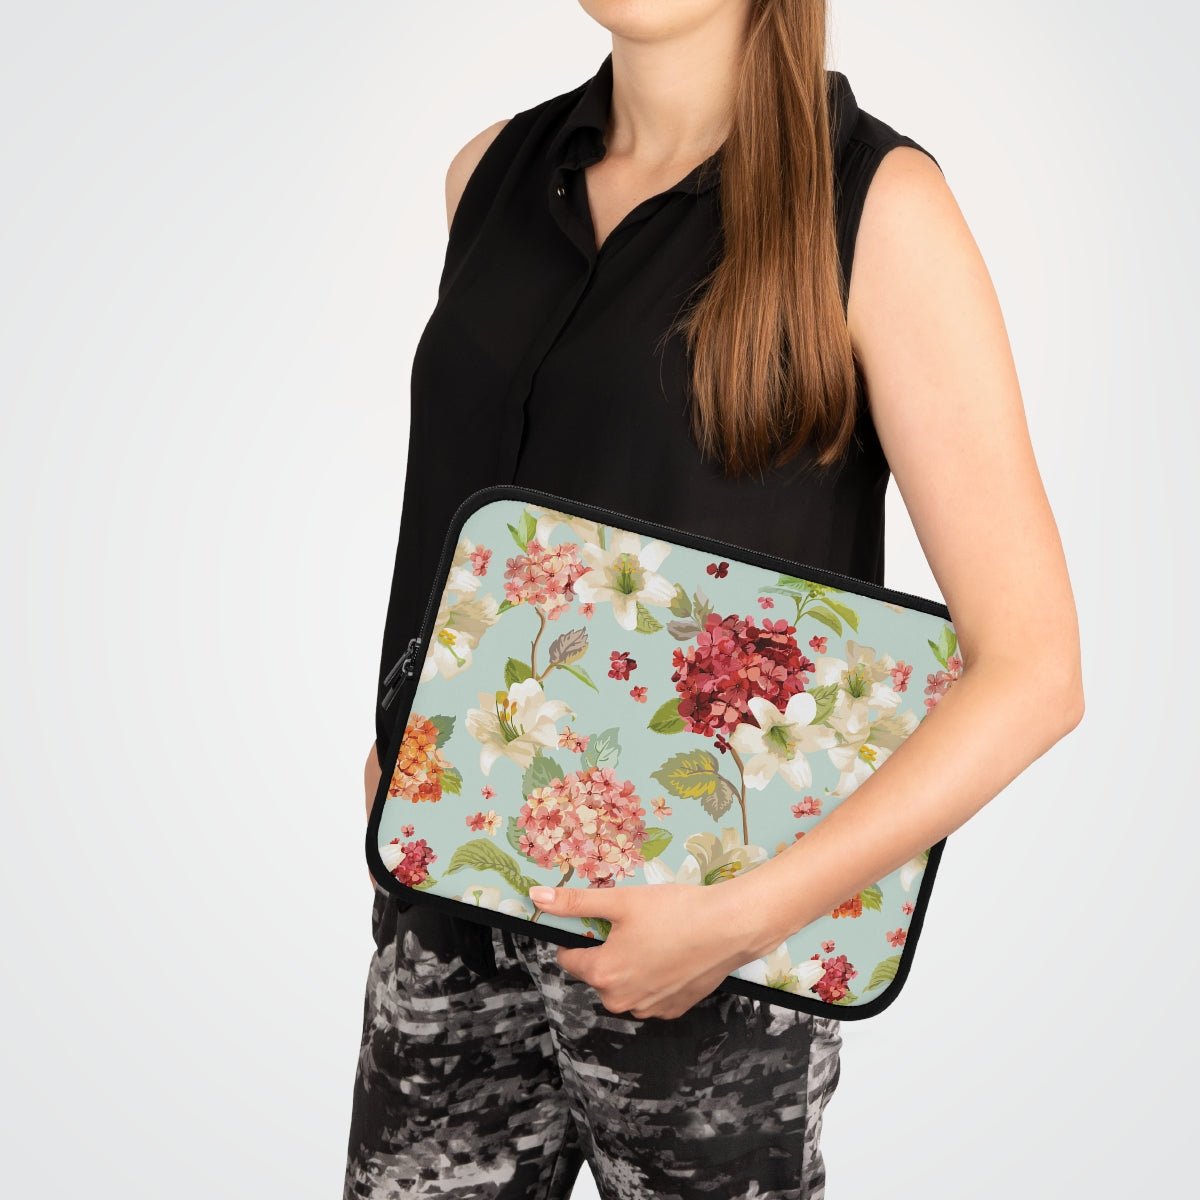 Autumn Hortensia and Lily Flowers Laptop Sleeve - Puffin Lime